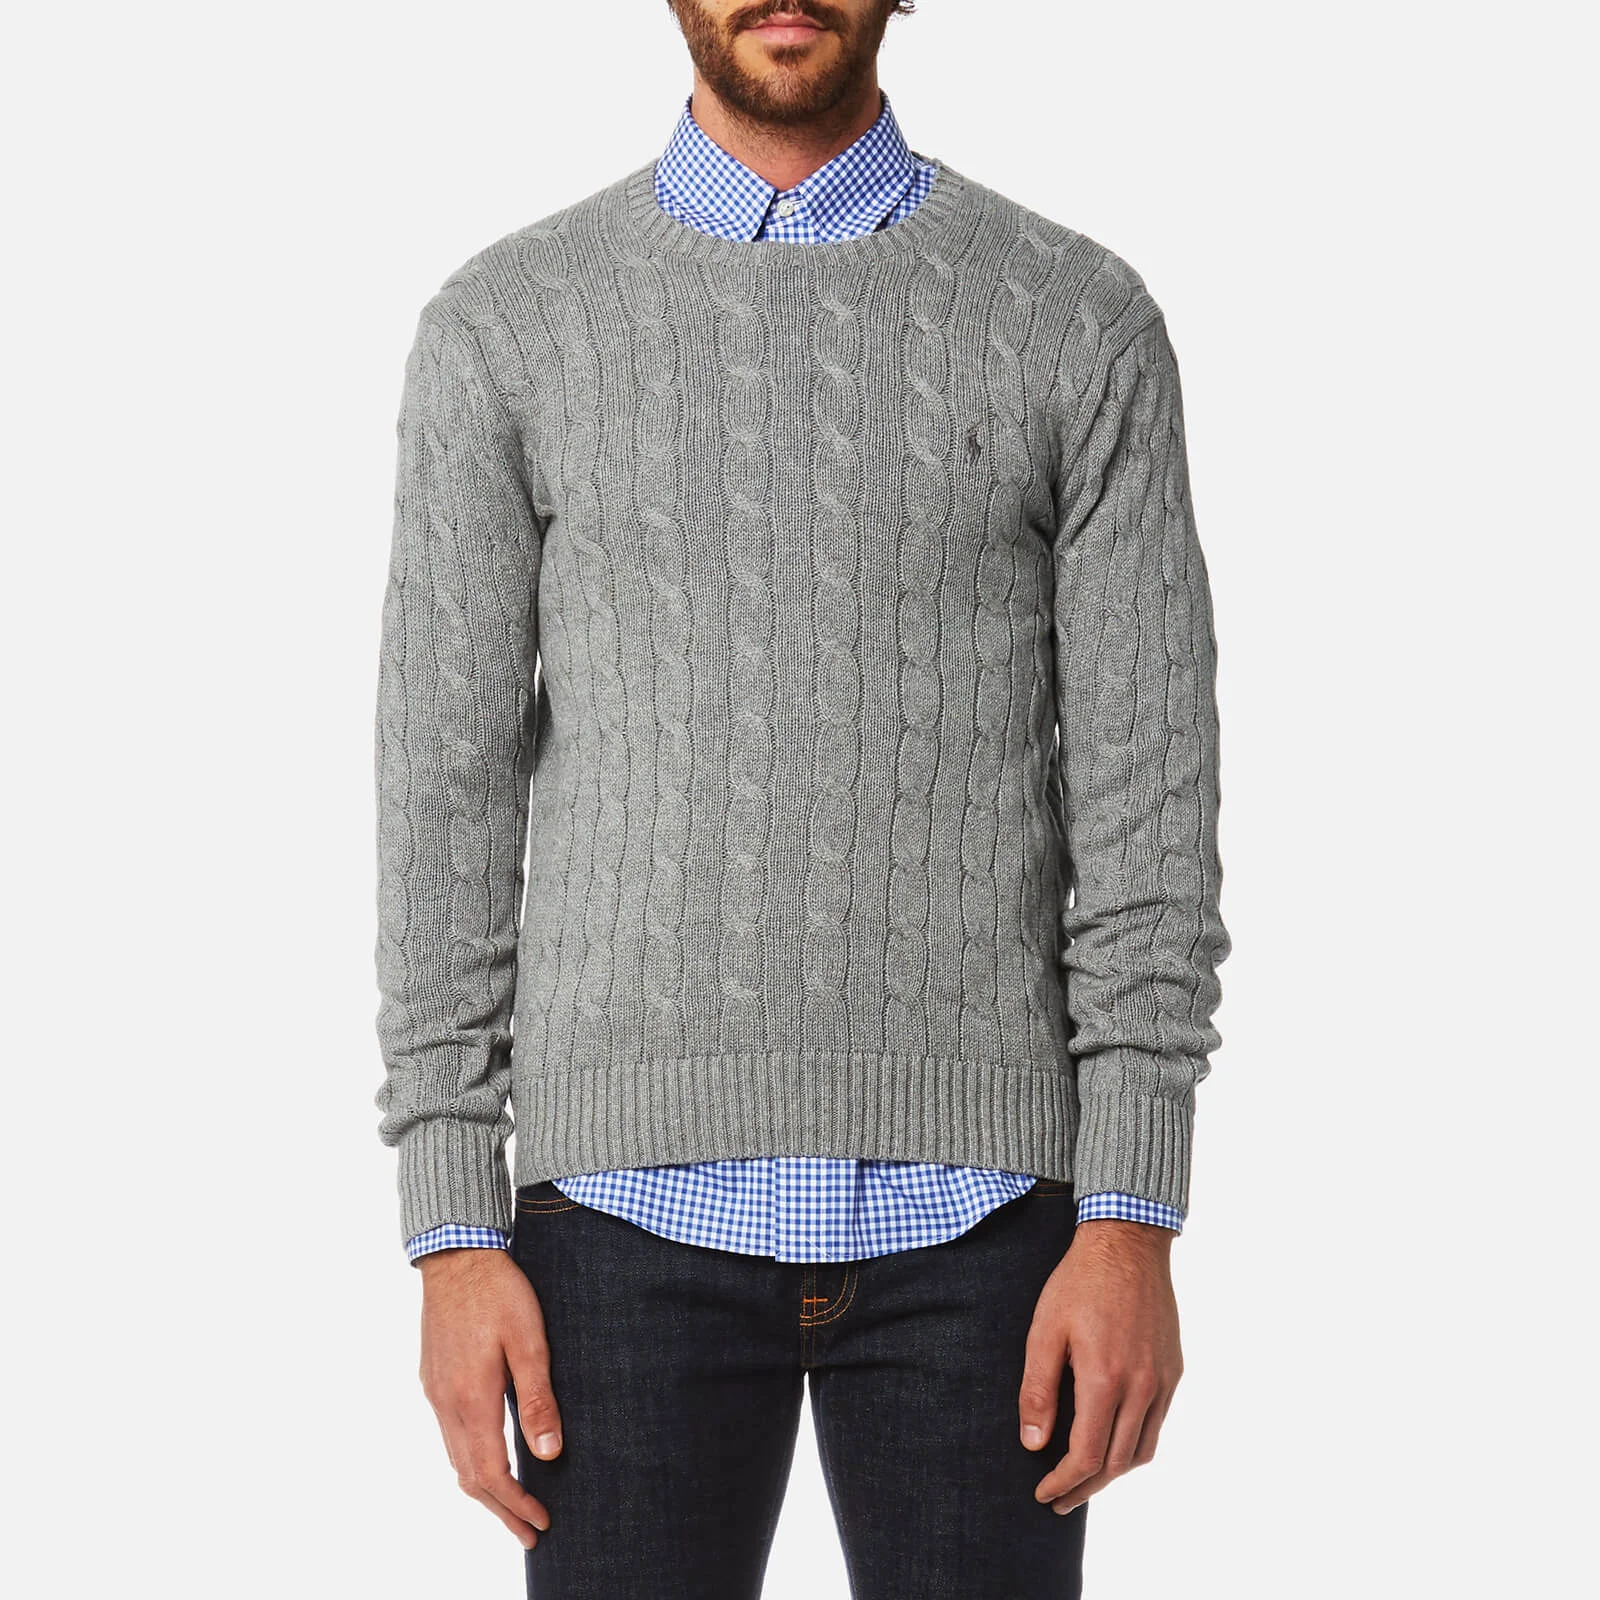 Polo Ralph Lauren Men's Cotton Cable Knitted Jumper - Fawn Grey Heather Image 1